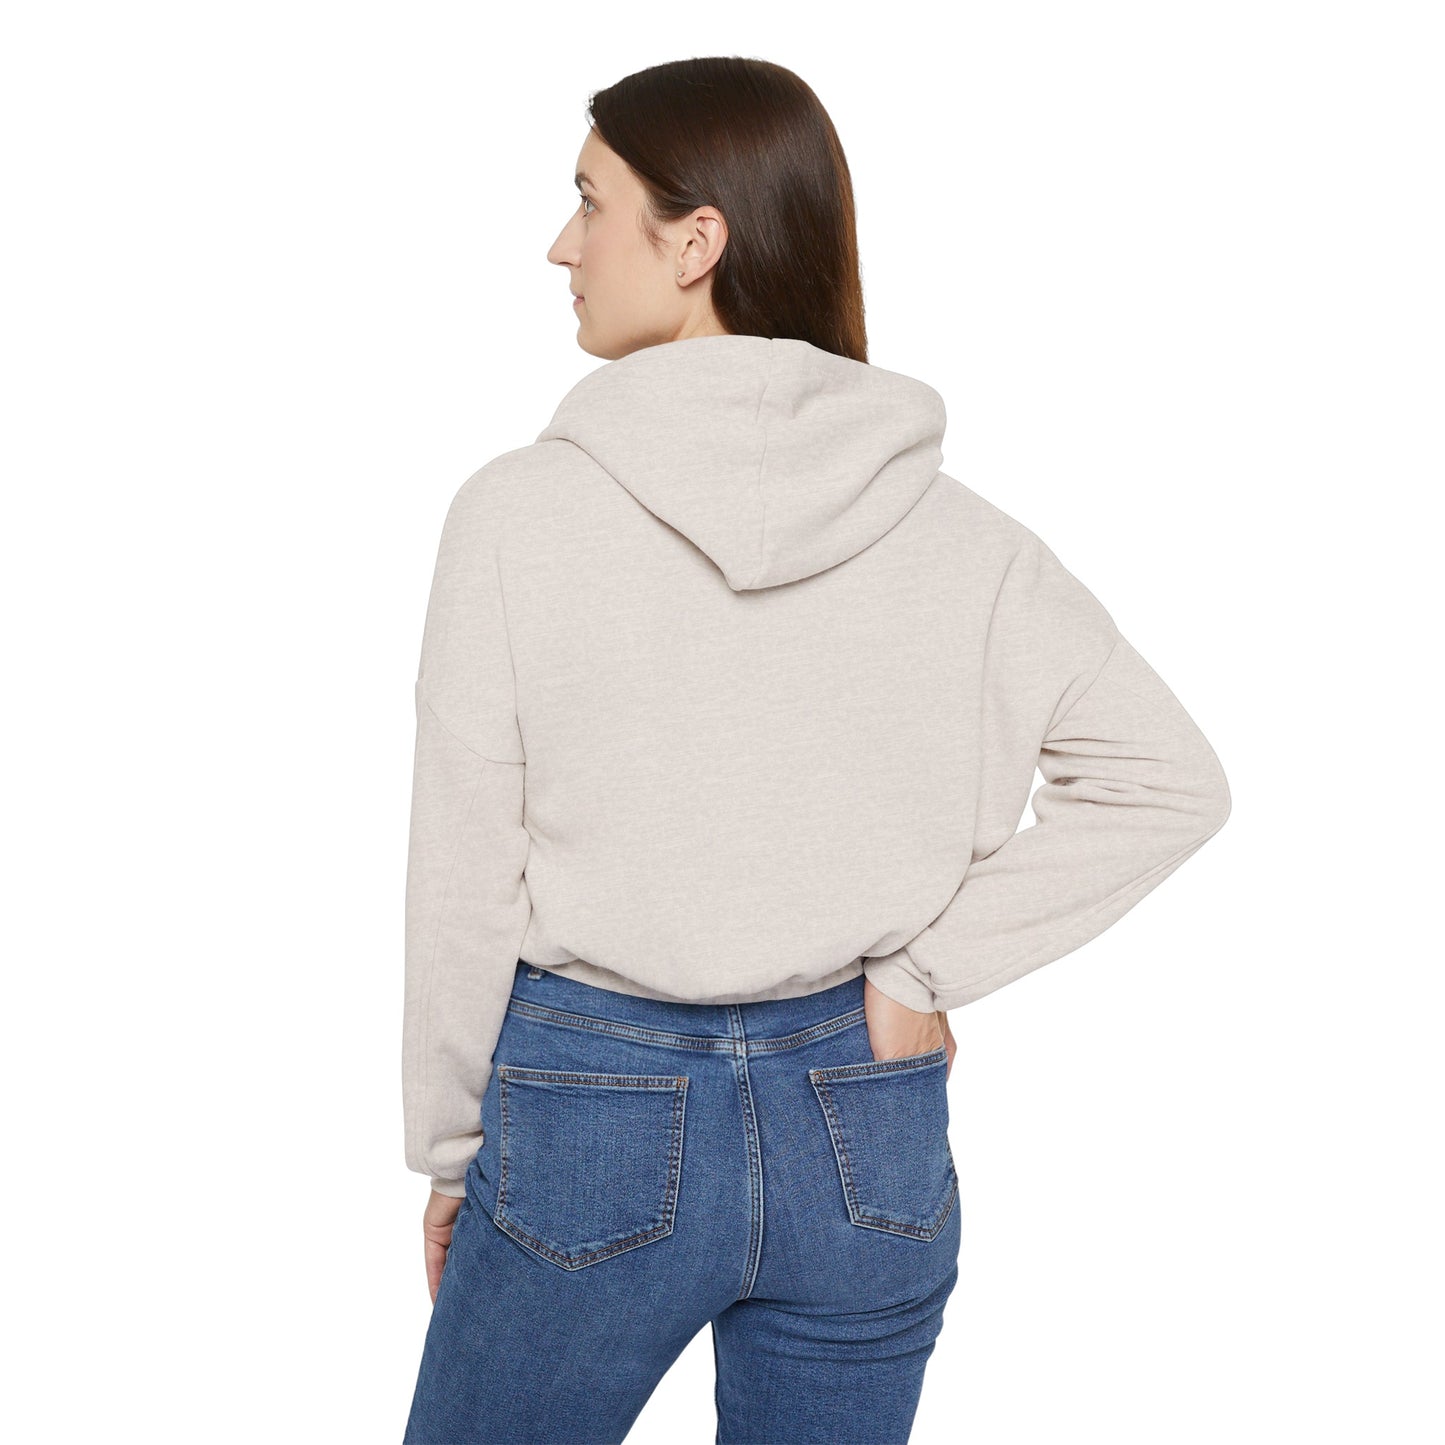 Live as if someone opened the gate! Women's Cinched Bottom Hoodie